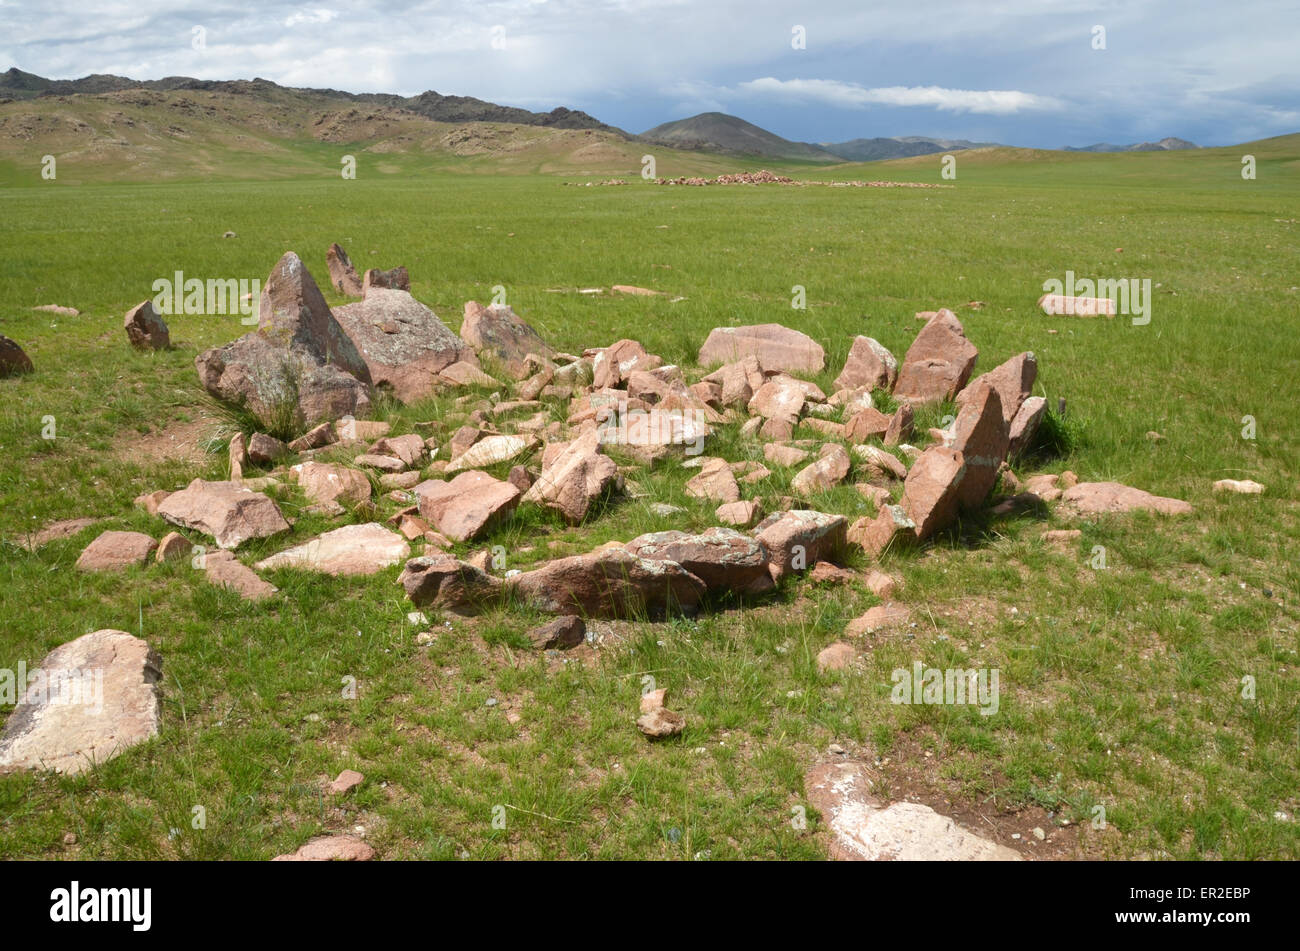 Burial mounds near the city of Moron, Ovsgol province, northern Mongolia. Stock Photo